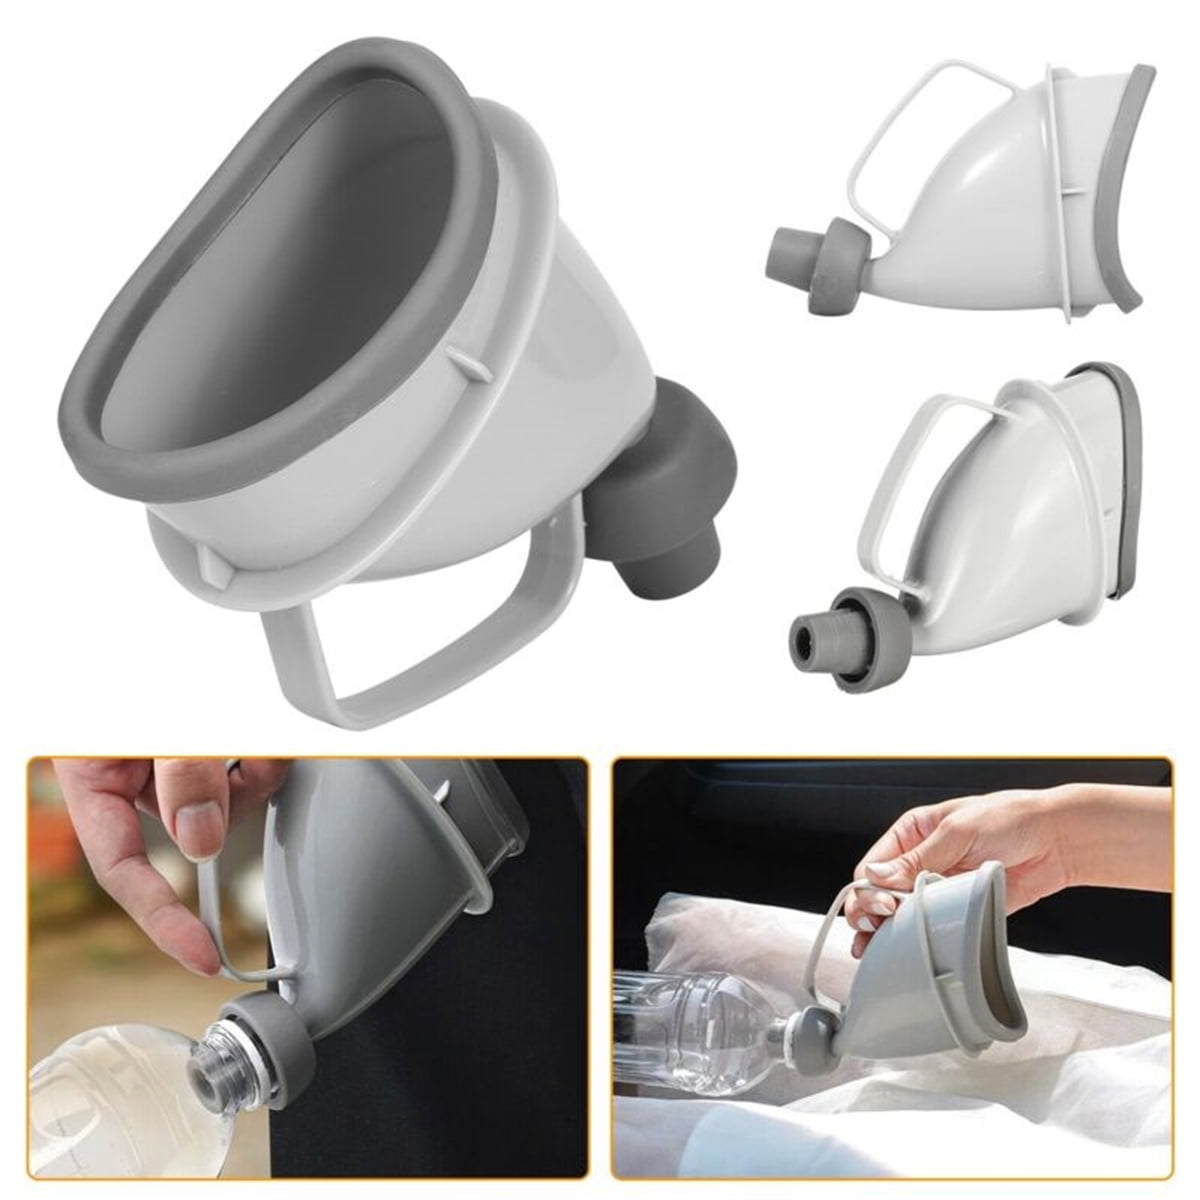 Details about   Unisex Portable Potty Pee Funnel Adults Emergency Urinal Device P5X6 